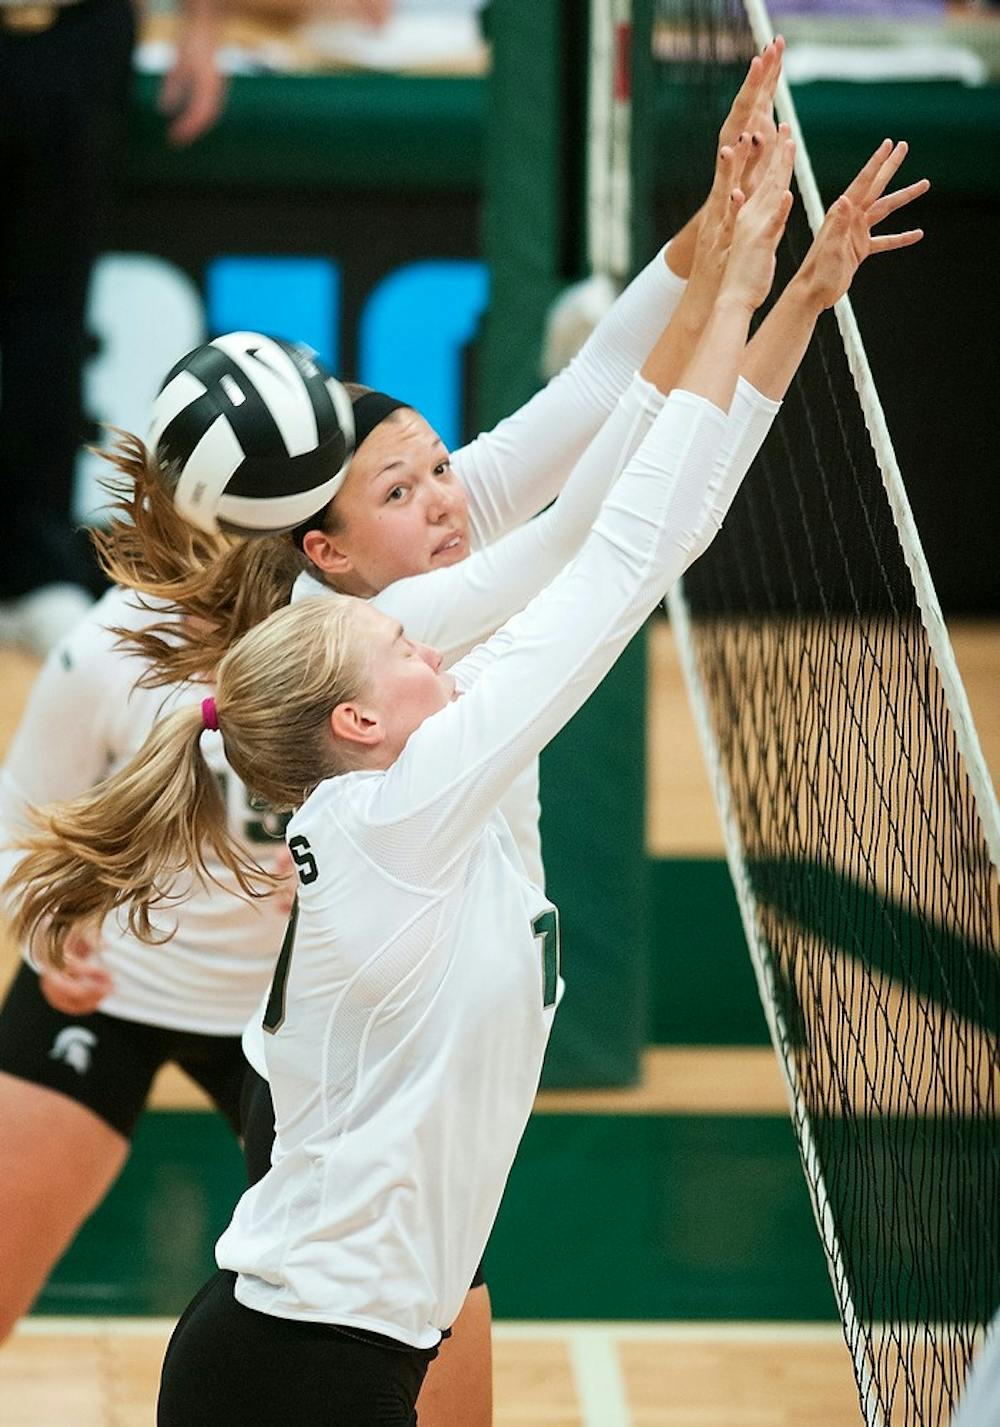 	<p>Senior middle blocker Kelsey Kuipers, left, and freshman middle blocker Megan Tompkins, right, miss a block during the Green and White game, Aug. 24, 2013, at Jenison Field House. The White team won 2-1. Danyelle Morrow/The State News</p>